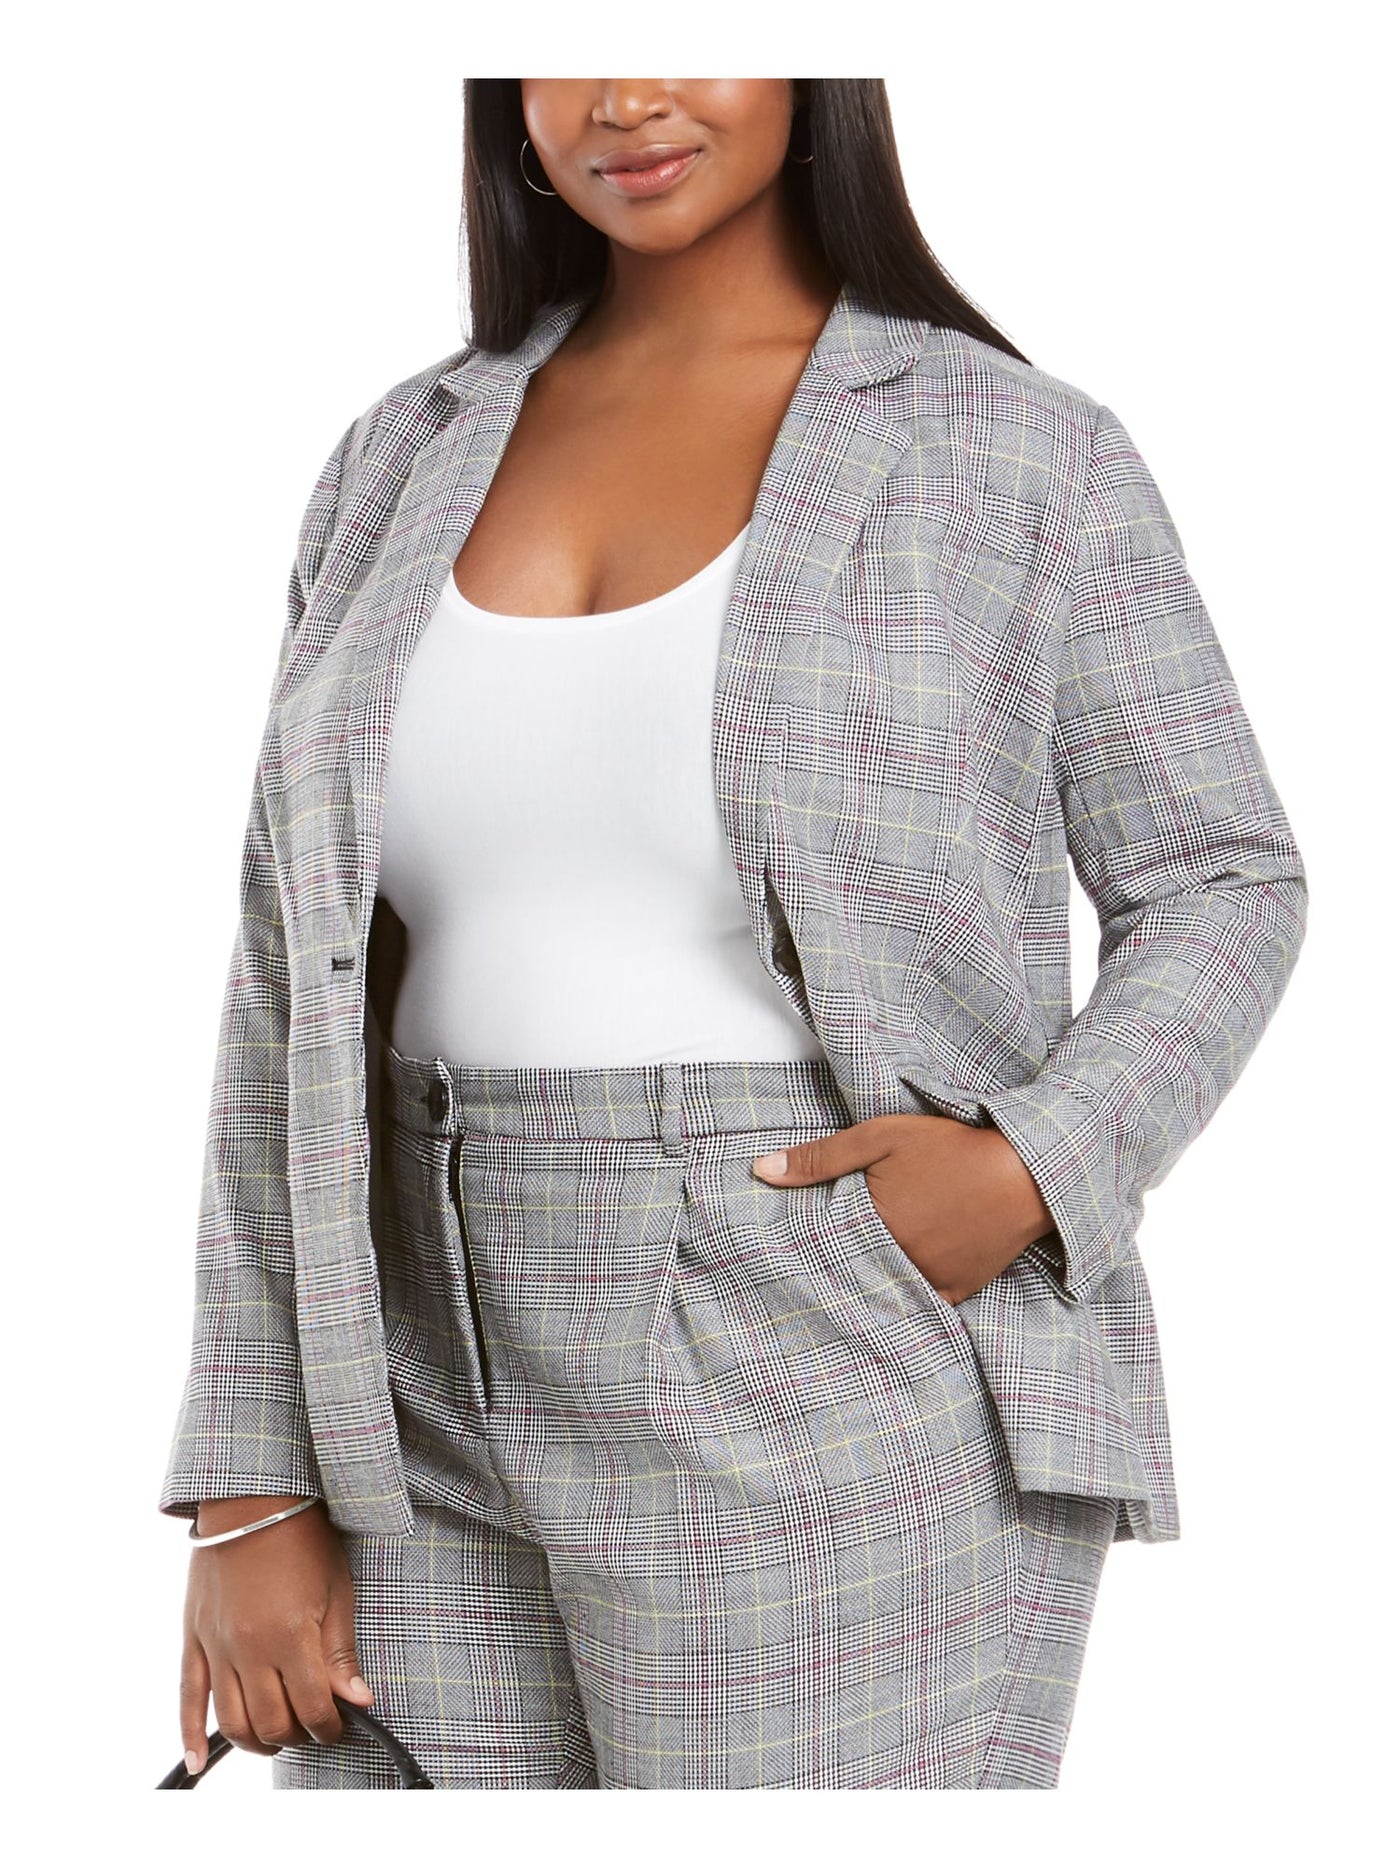 VINCE CAMUTO Womens Gray Printed Wear To Work Suit Jacket Plus 14W